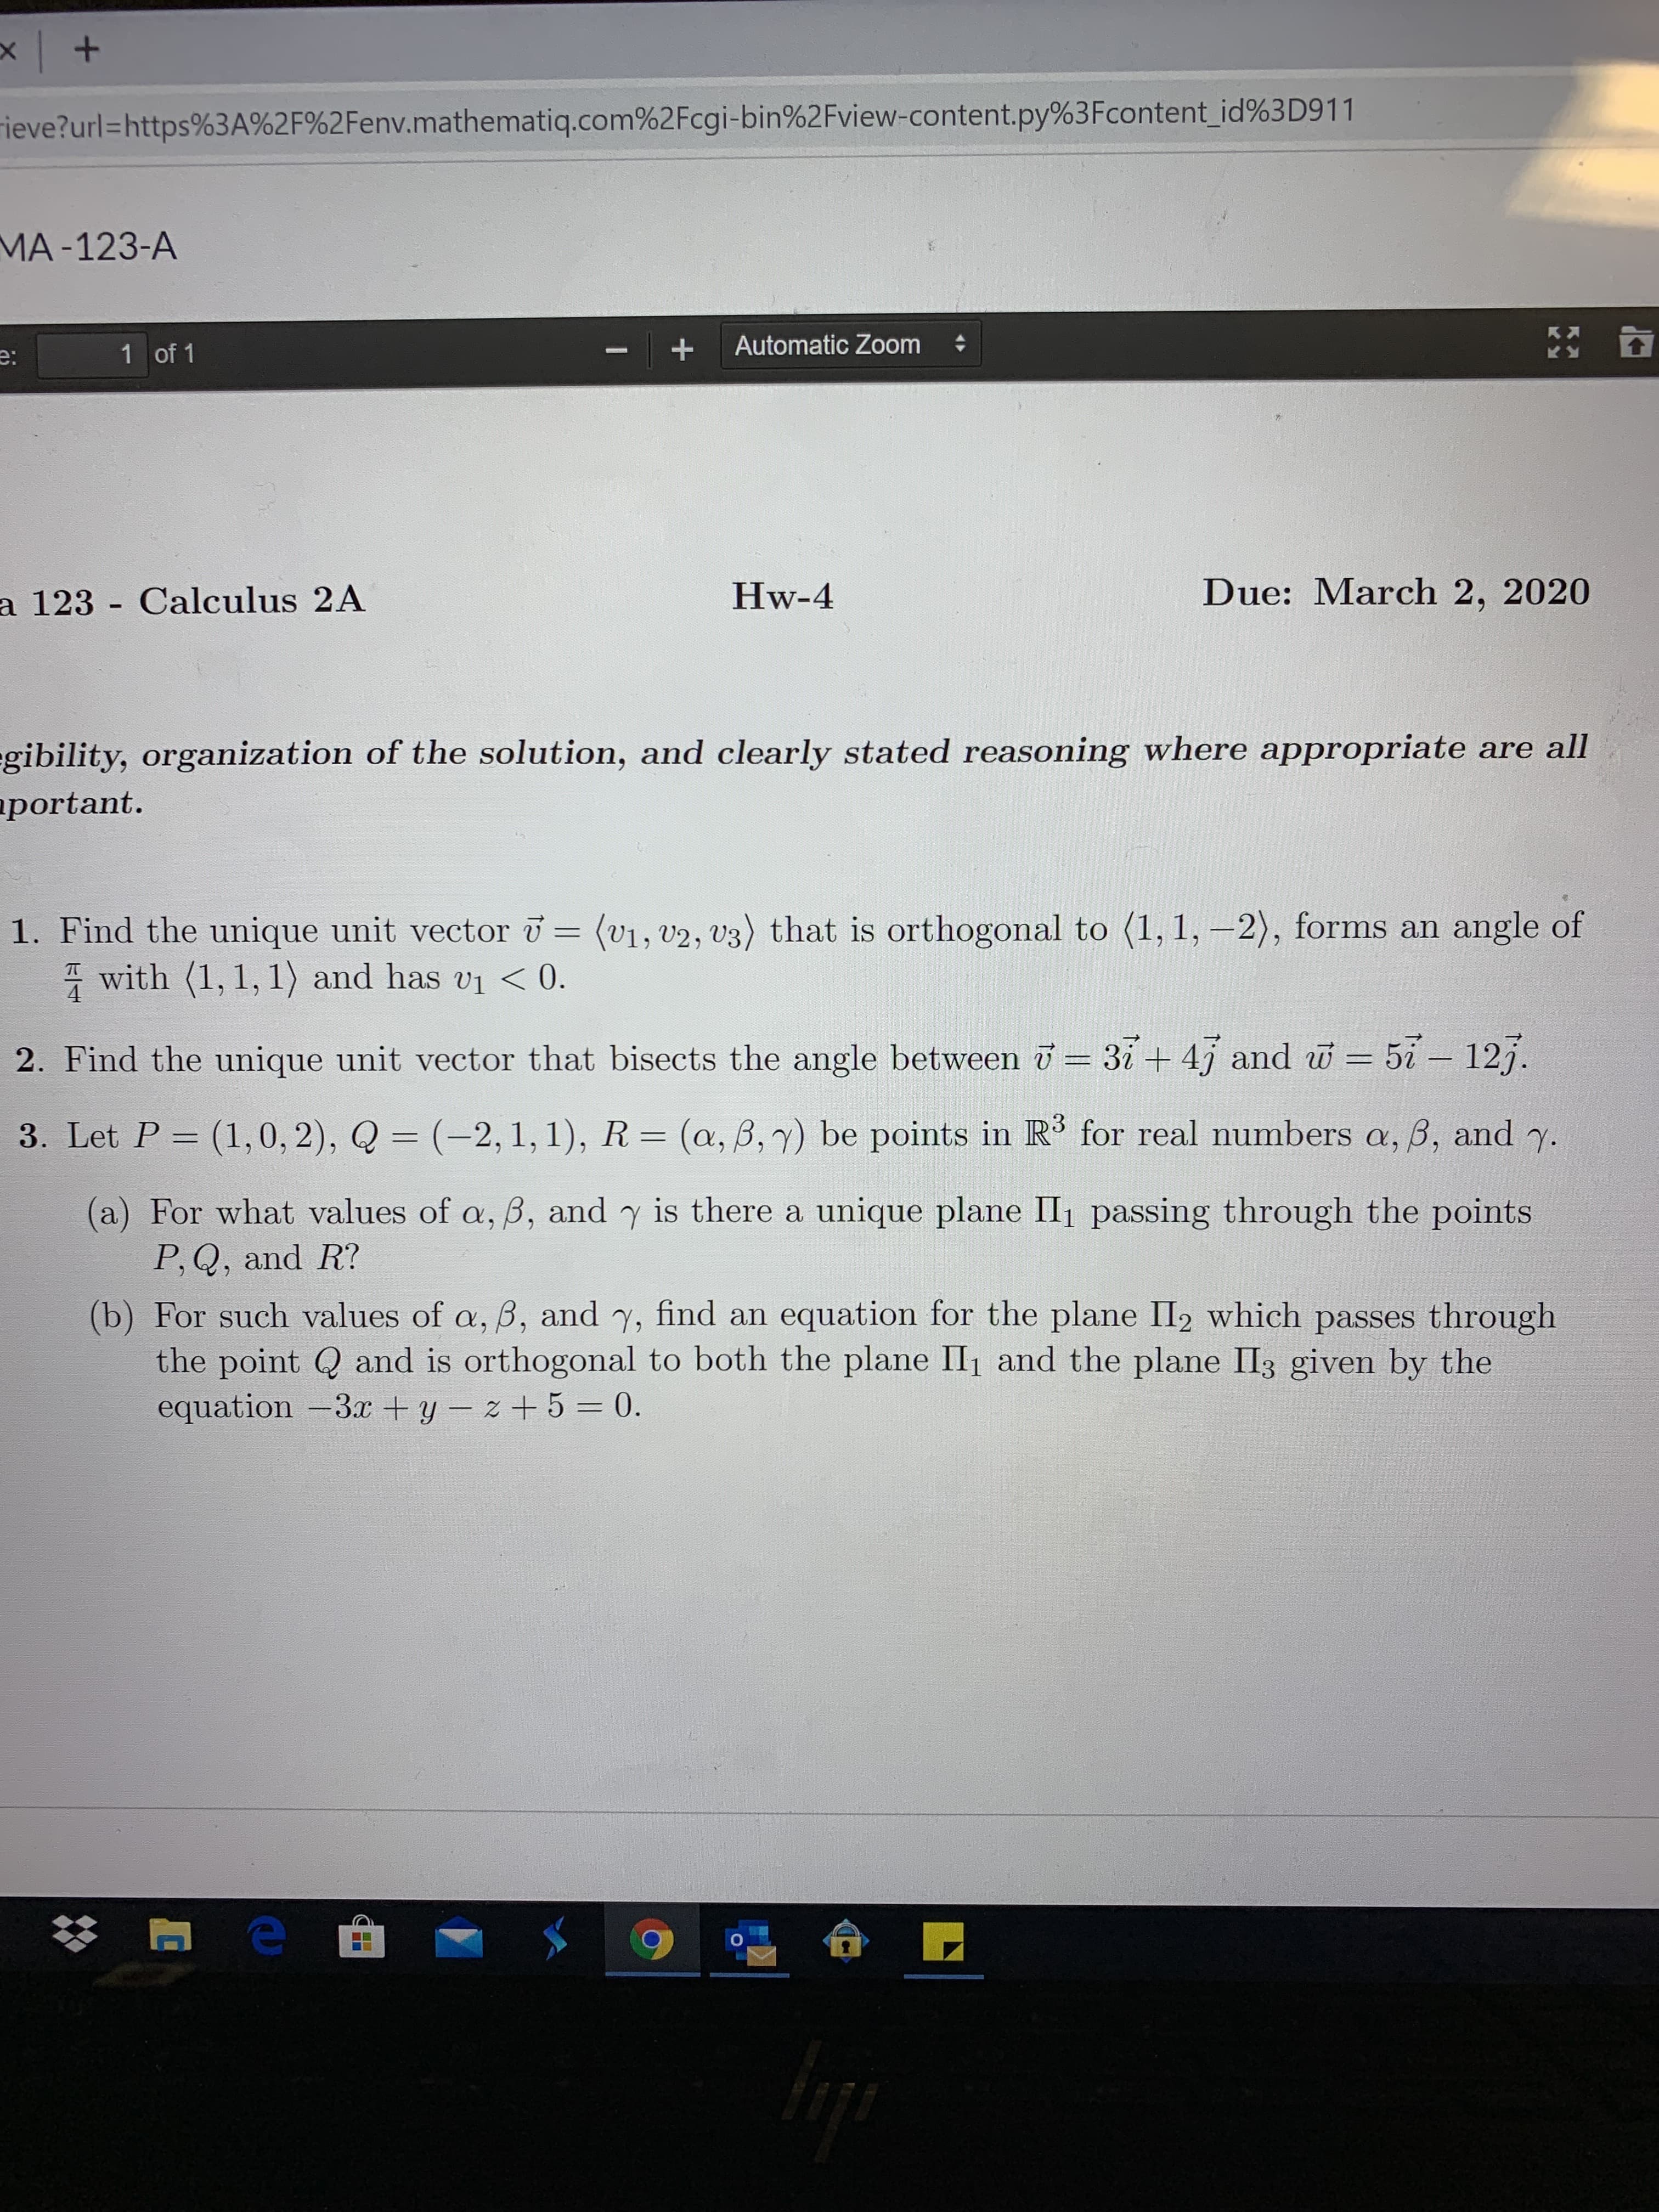 rieve?url=https%3A%2F%2Fenv.mathematiq.com%2Fcgi-bin%2Fview-content.py%3Fcontent_id%3D911
MA-123-A
e:
1 of 1
Automatic Zoom
a 123 - Calculus 2A
Hw-4
Due: March 2, 2020
gibility, organization of the solution, and clearly stated reasoning where appropriate are all
aportant.
1. Find the unique unit vector = (v1, v2, v3) that is orthogonal to (1, 1, –2), forms an angle of
* with (1, 1, 1) and has vi < 0.
2. Find the unique unit vector that bisects the angle between = 37+ 47 and w = 57- 127.
3. Let P = (1,0, 2), Q = (-2, 1, 1), R= (a, ß,7) be points in R' for real numbers a, B, and y.
%3D
(a) For what values of a, B, and y is there a unique plane II, passing through the points
P,Q, and R?
(b) For such values of a, B, and y, find an equation for the plane II2 which passes through
the point Q and is orthogonal to both the plane II1 and the plane II3 given by the
equation -3x + y – z + 5 = 0.
